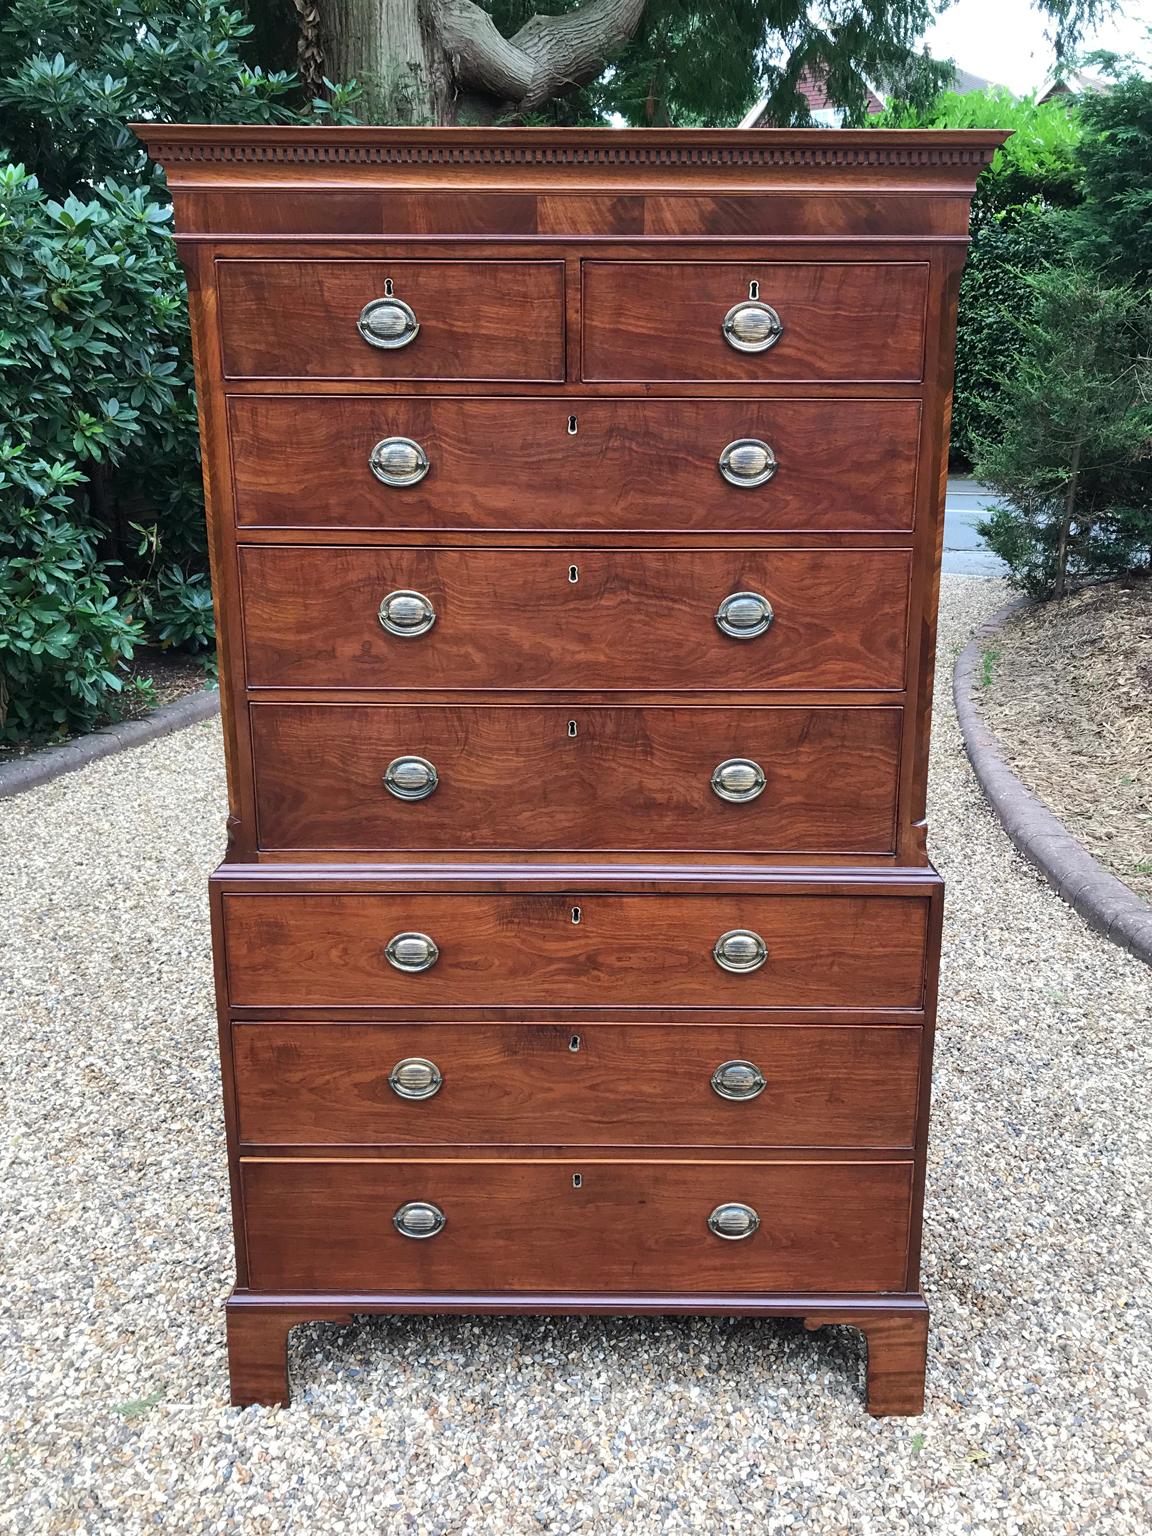 A very high quality 18th century mahogany chest on chest (Tallboy) two short drawers at the top and six long drawers. Original oval brass handles and solid oak lined drawers. Comes apart in two separate sections on original bracket feet,

circa